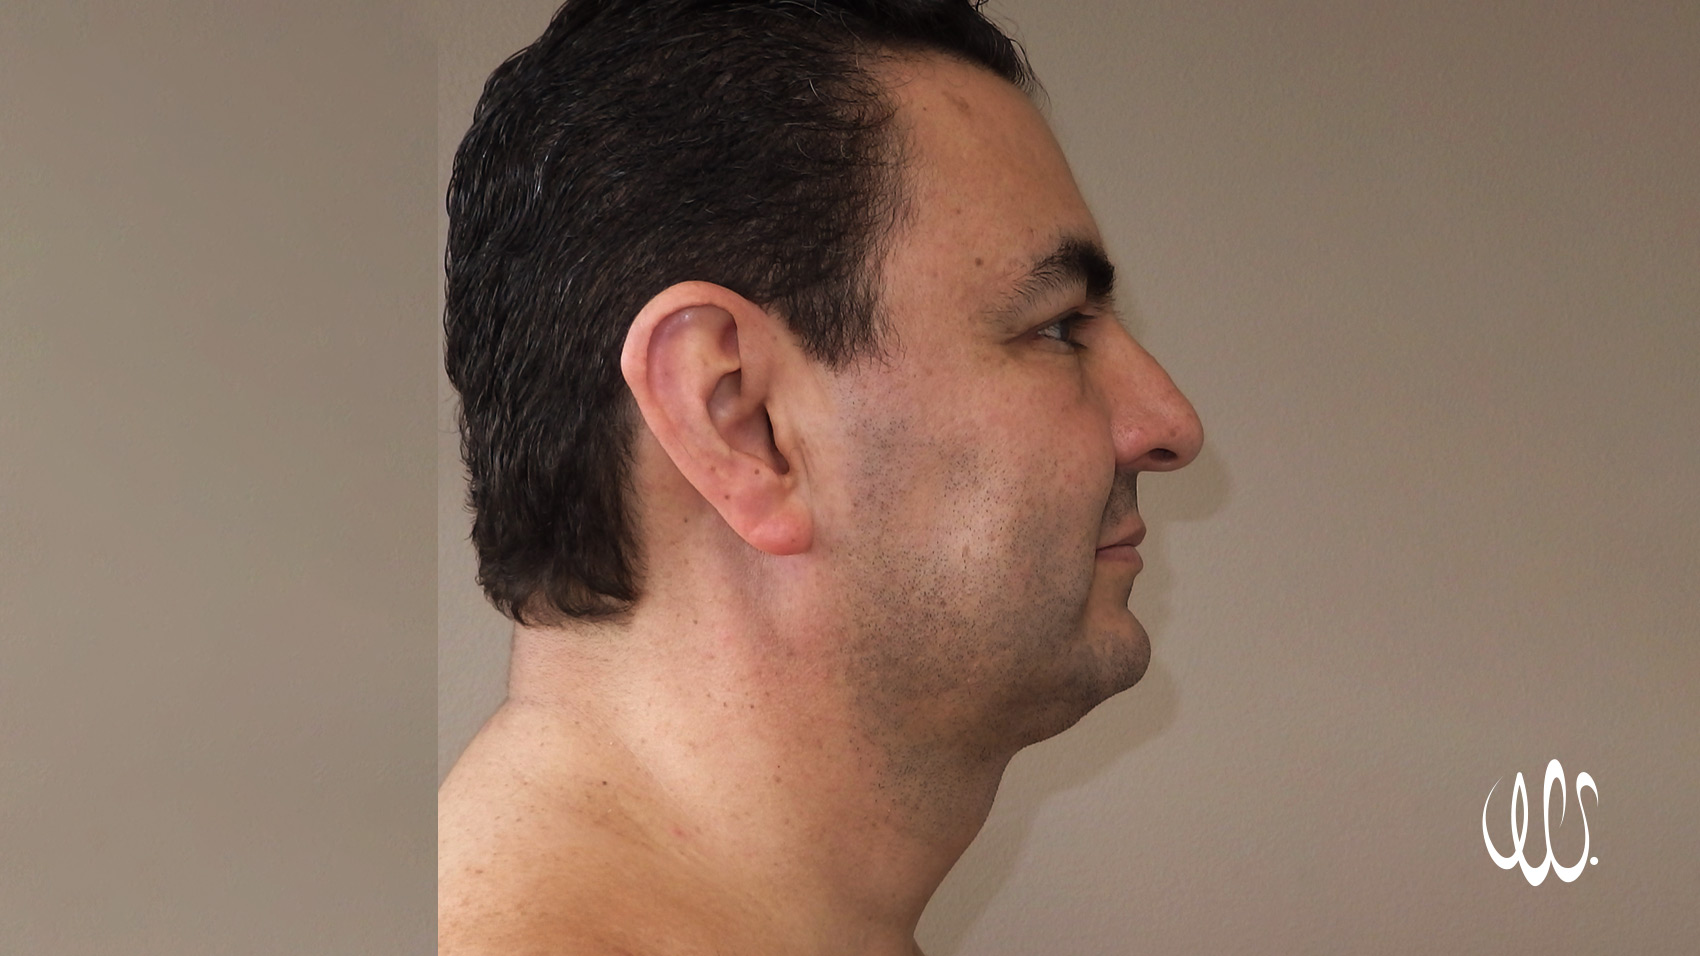 Chin Laser Lipo - After